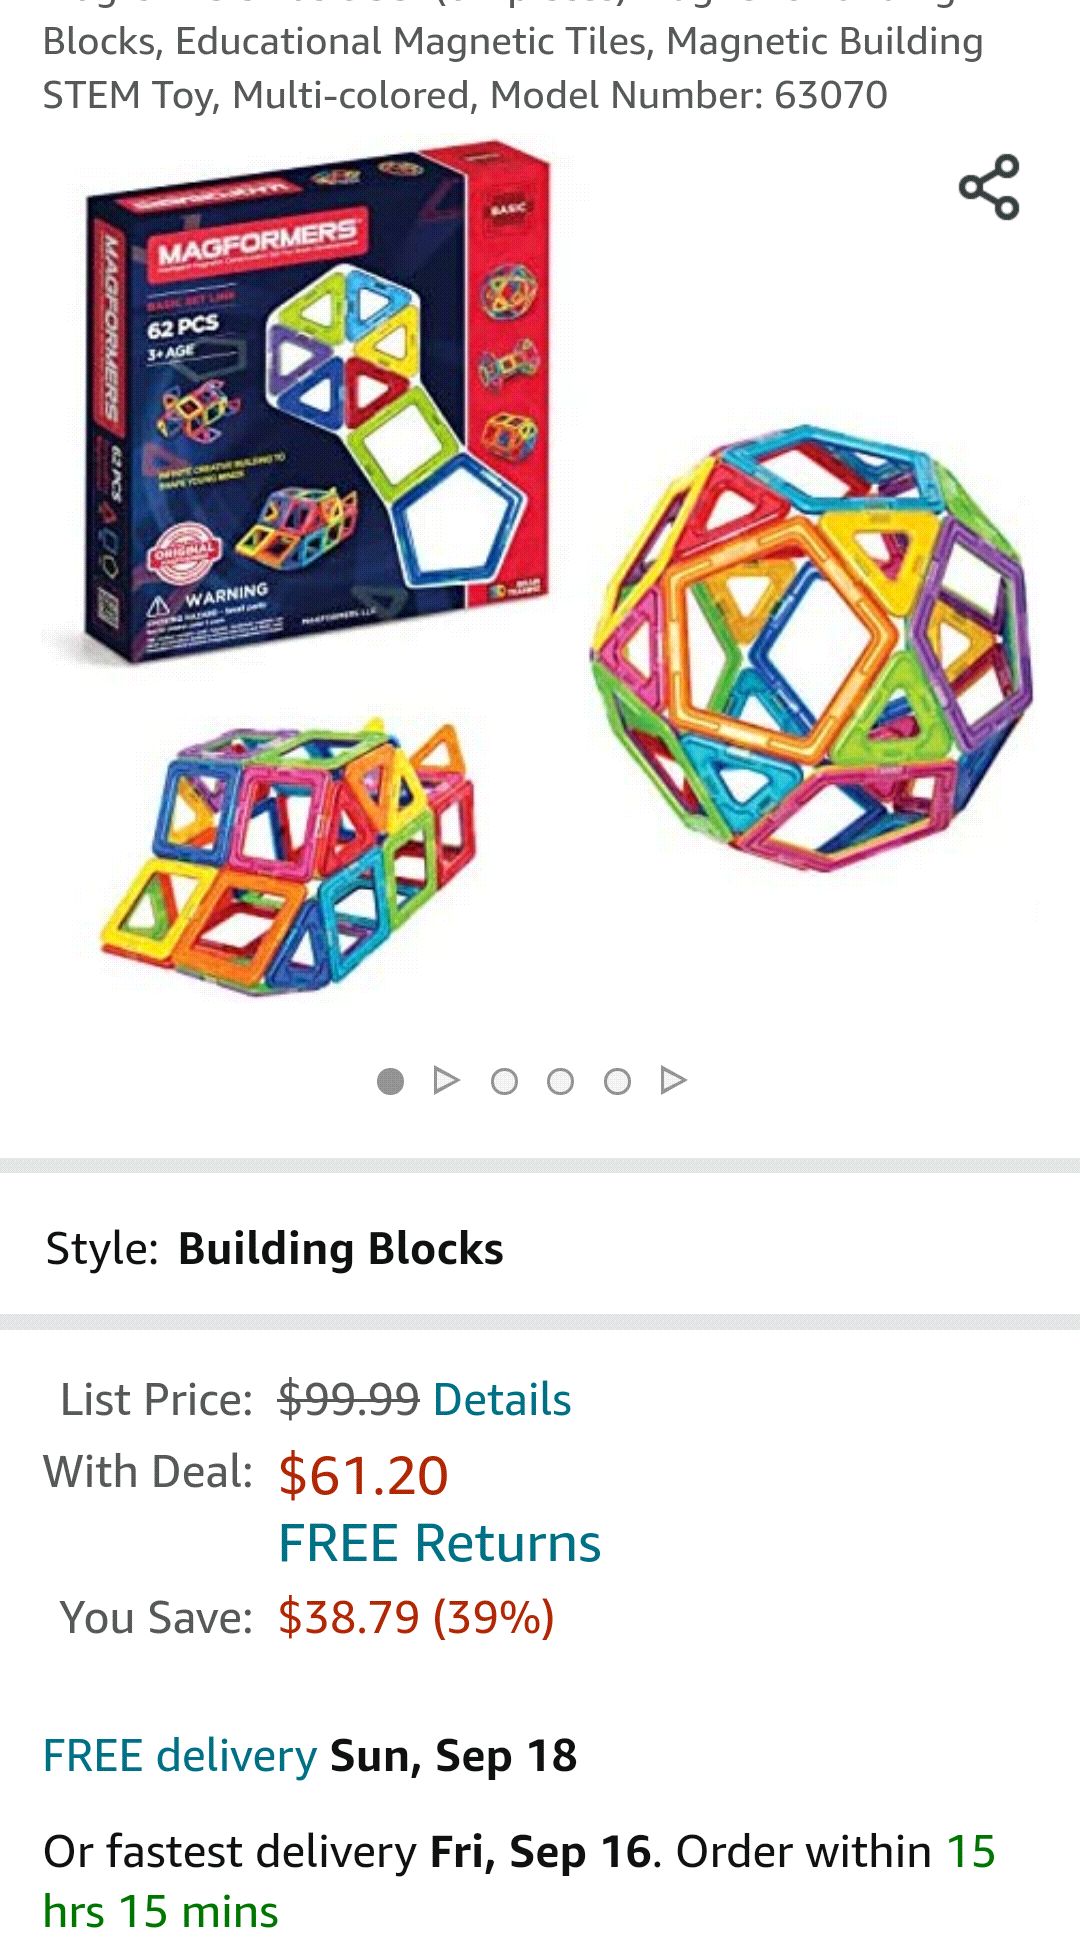 Magformers磁力片经典款 Basic Set (62-pieces) Magnetic Building Blocks, Educational Magnetic Tiles, Magnetic Building STEM Toy, Multi-colored, Model Number: 63070 : Everything Else